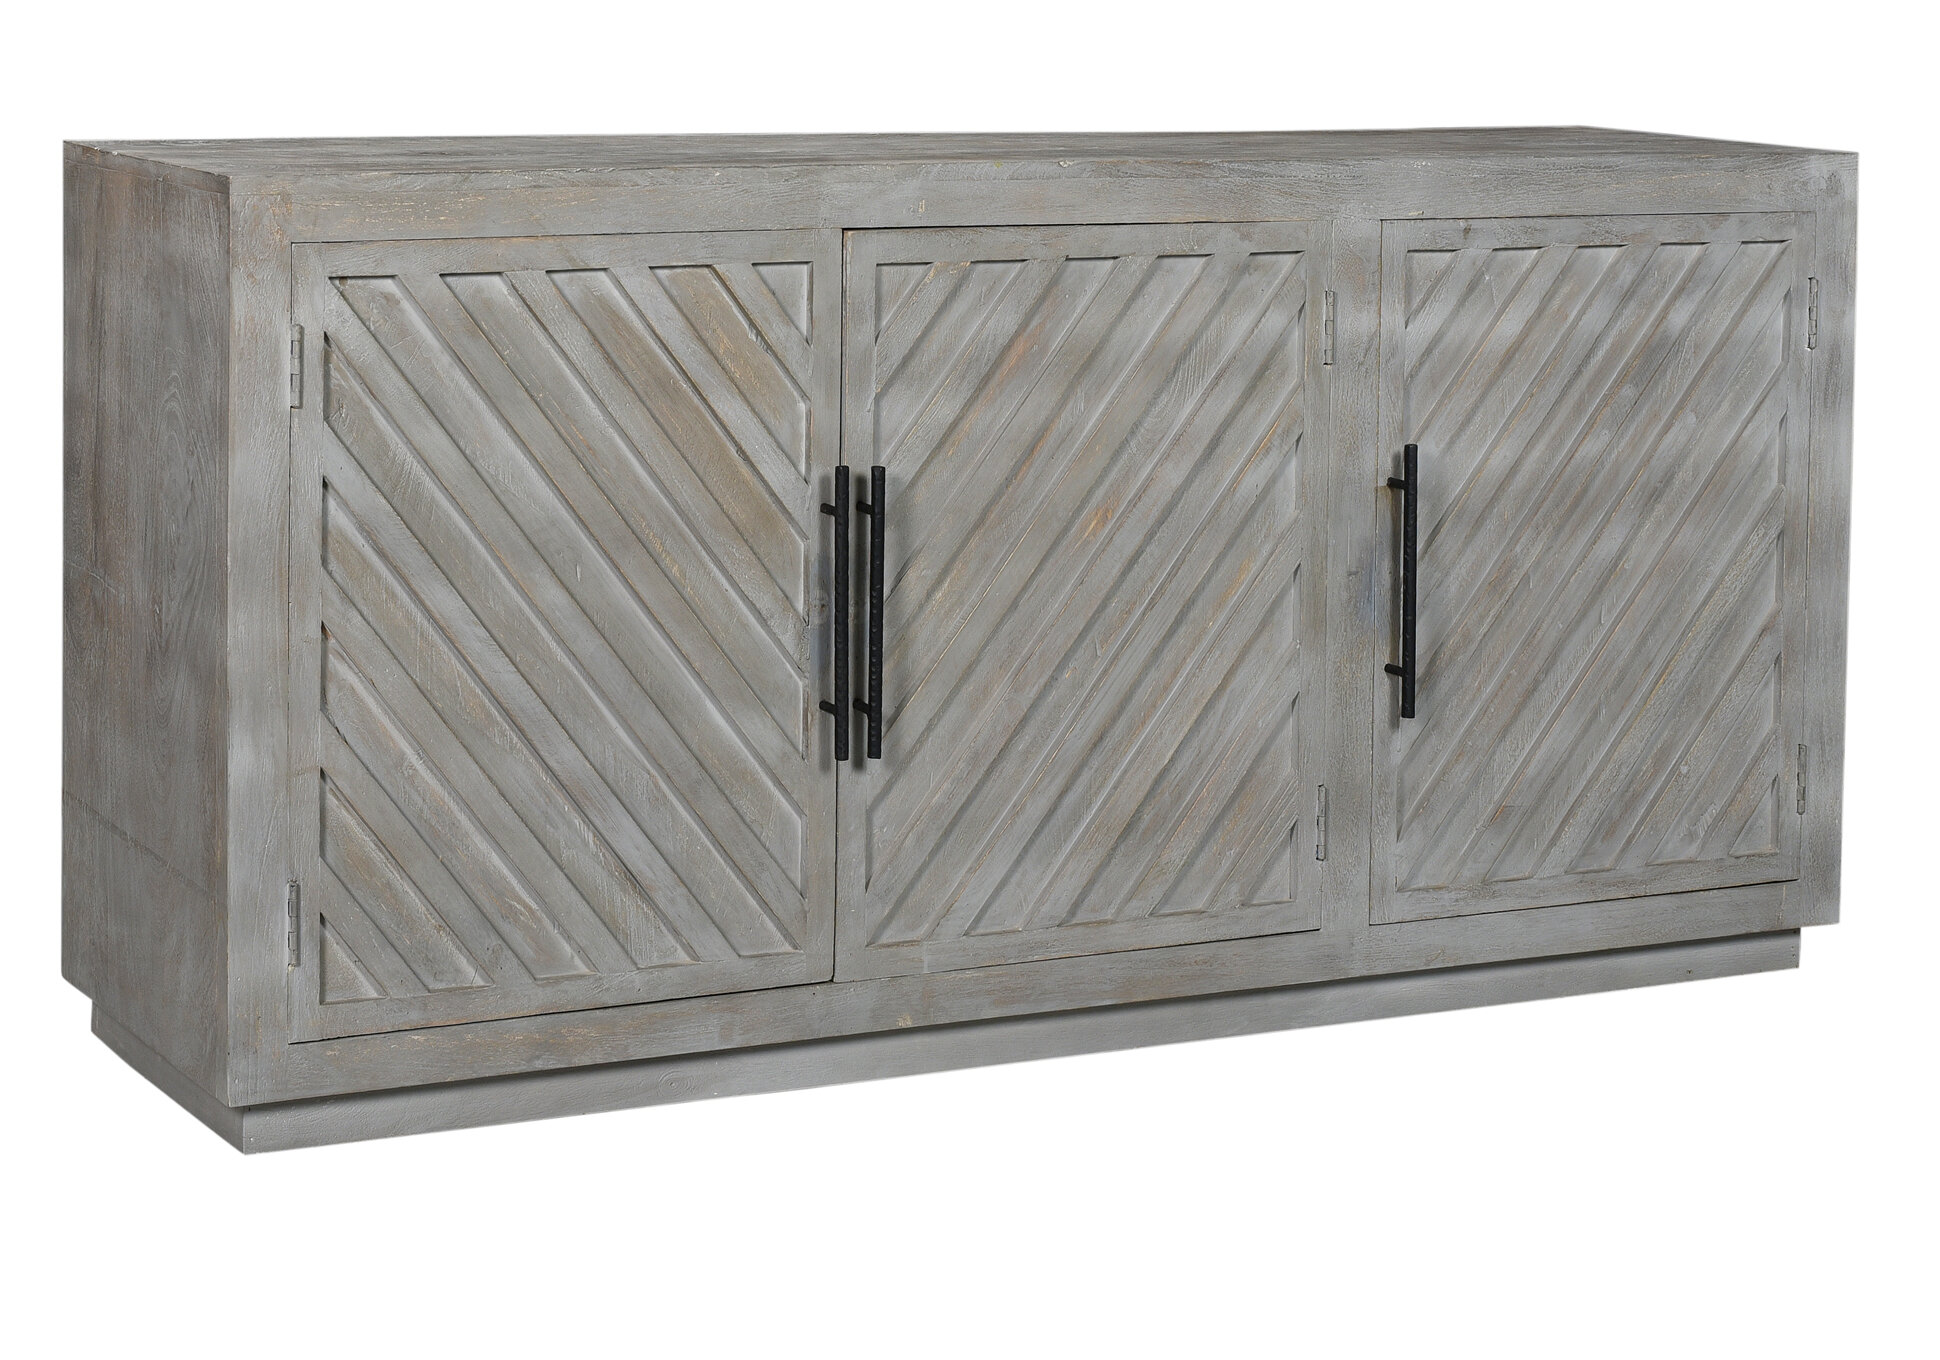 Locking Cabinets Sideboards Buffets You Ll Love In 2020 Wayfair